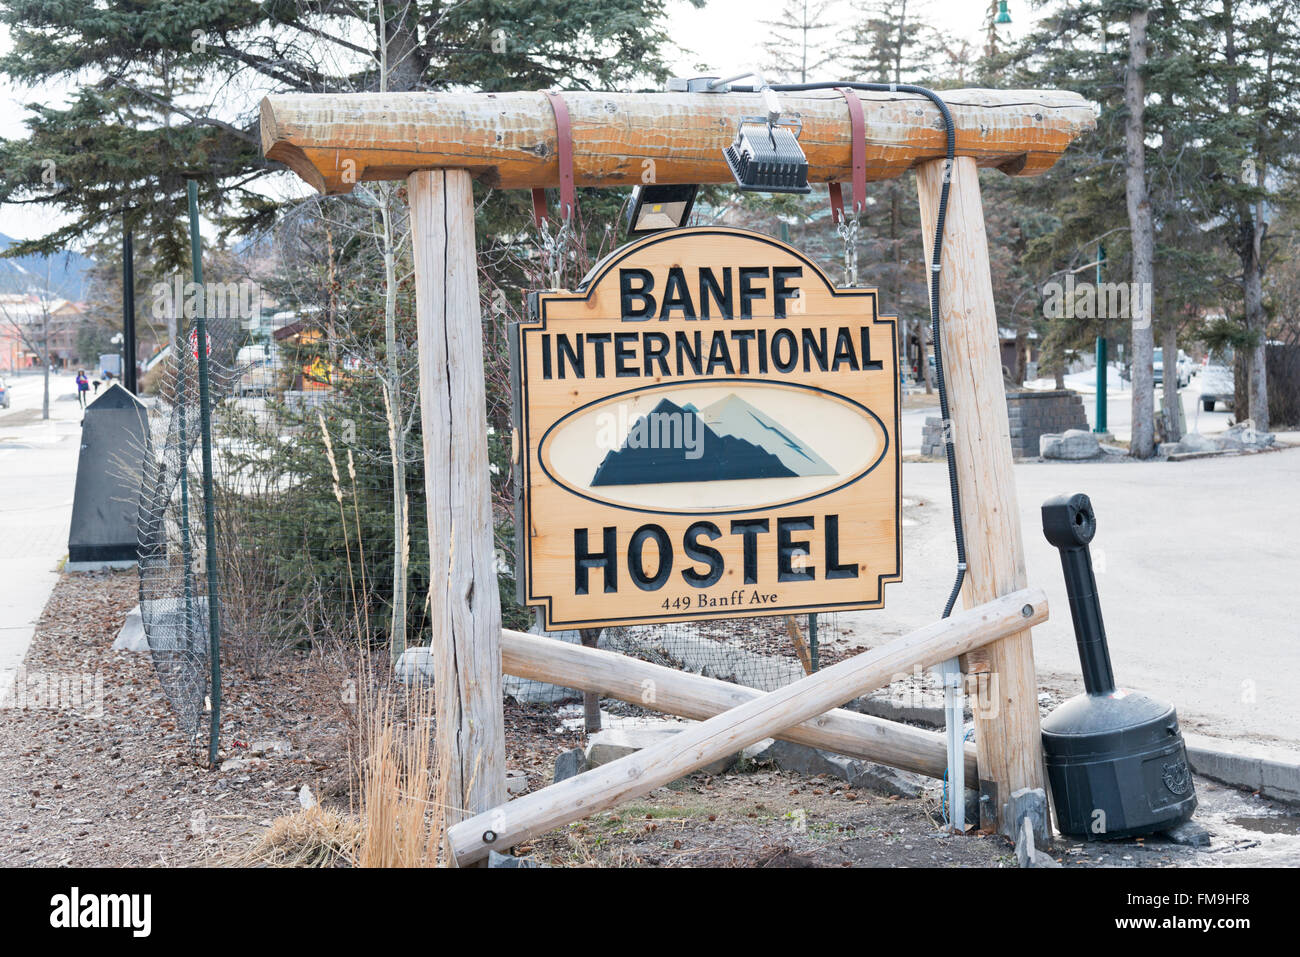 The sign for the Banff International Hostel, Banff Canada in winter Stock Photo